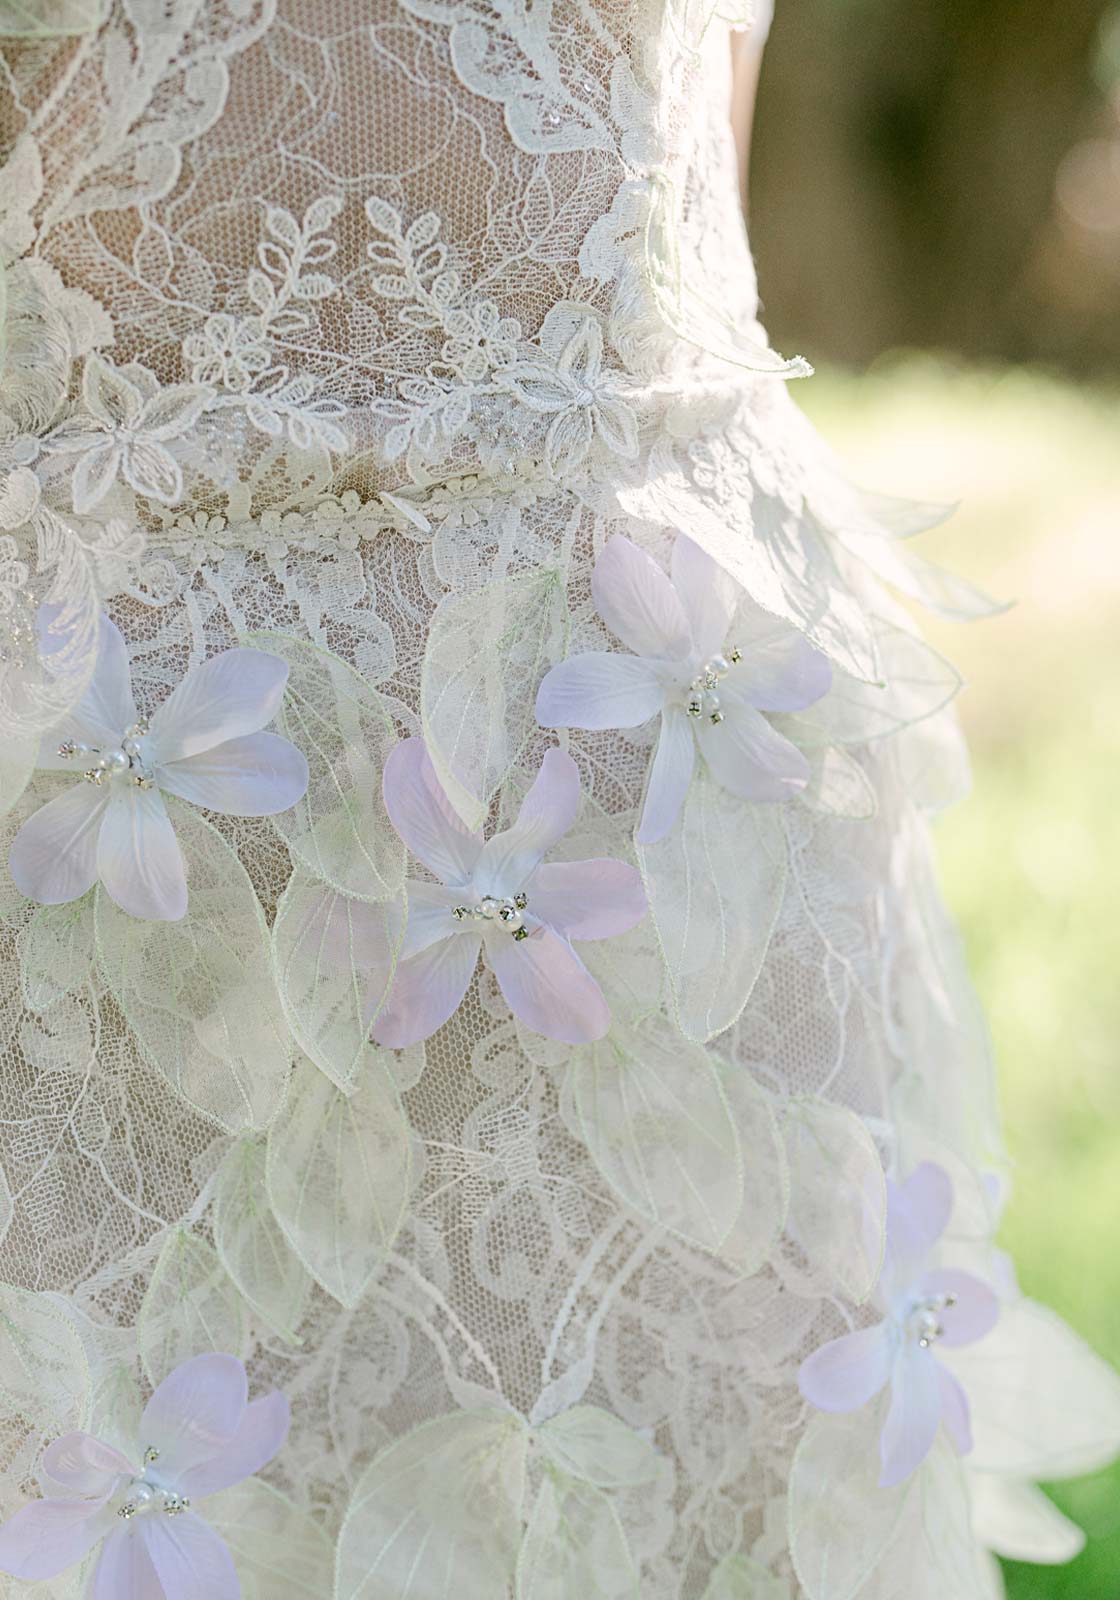 Detail of hand applied leaf appliques on the Everglade wedding dress overskirt